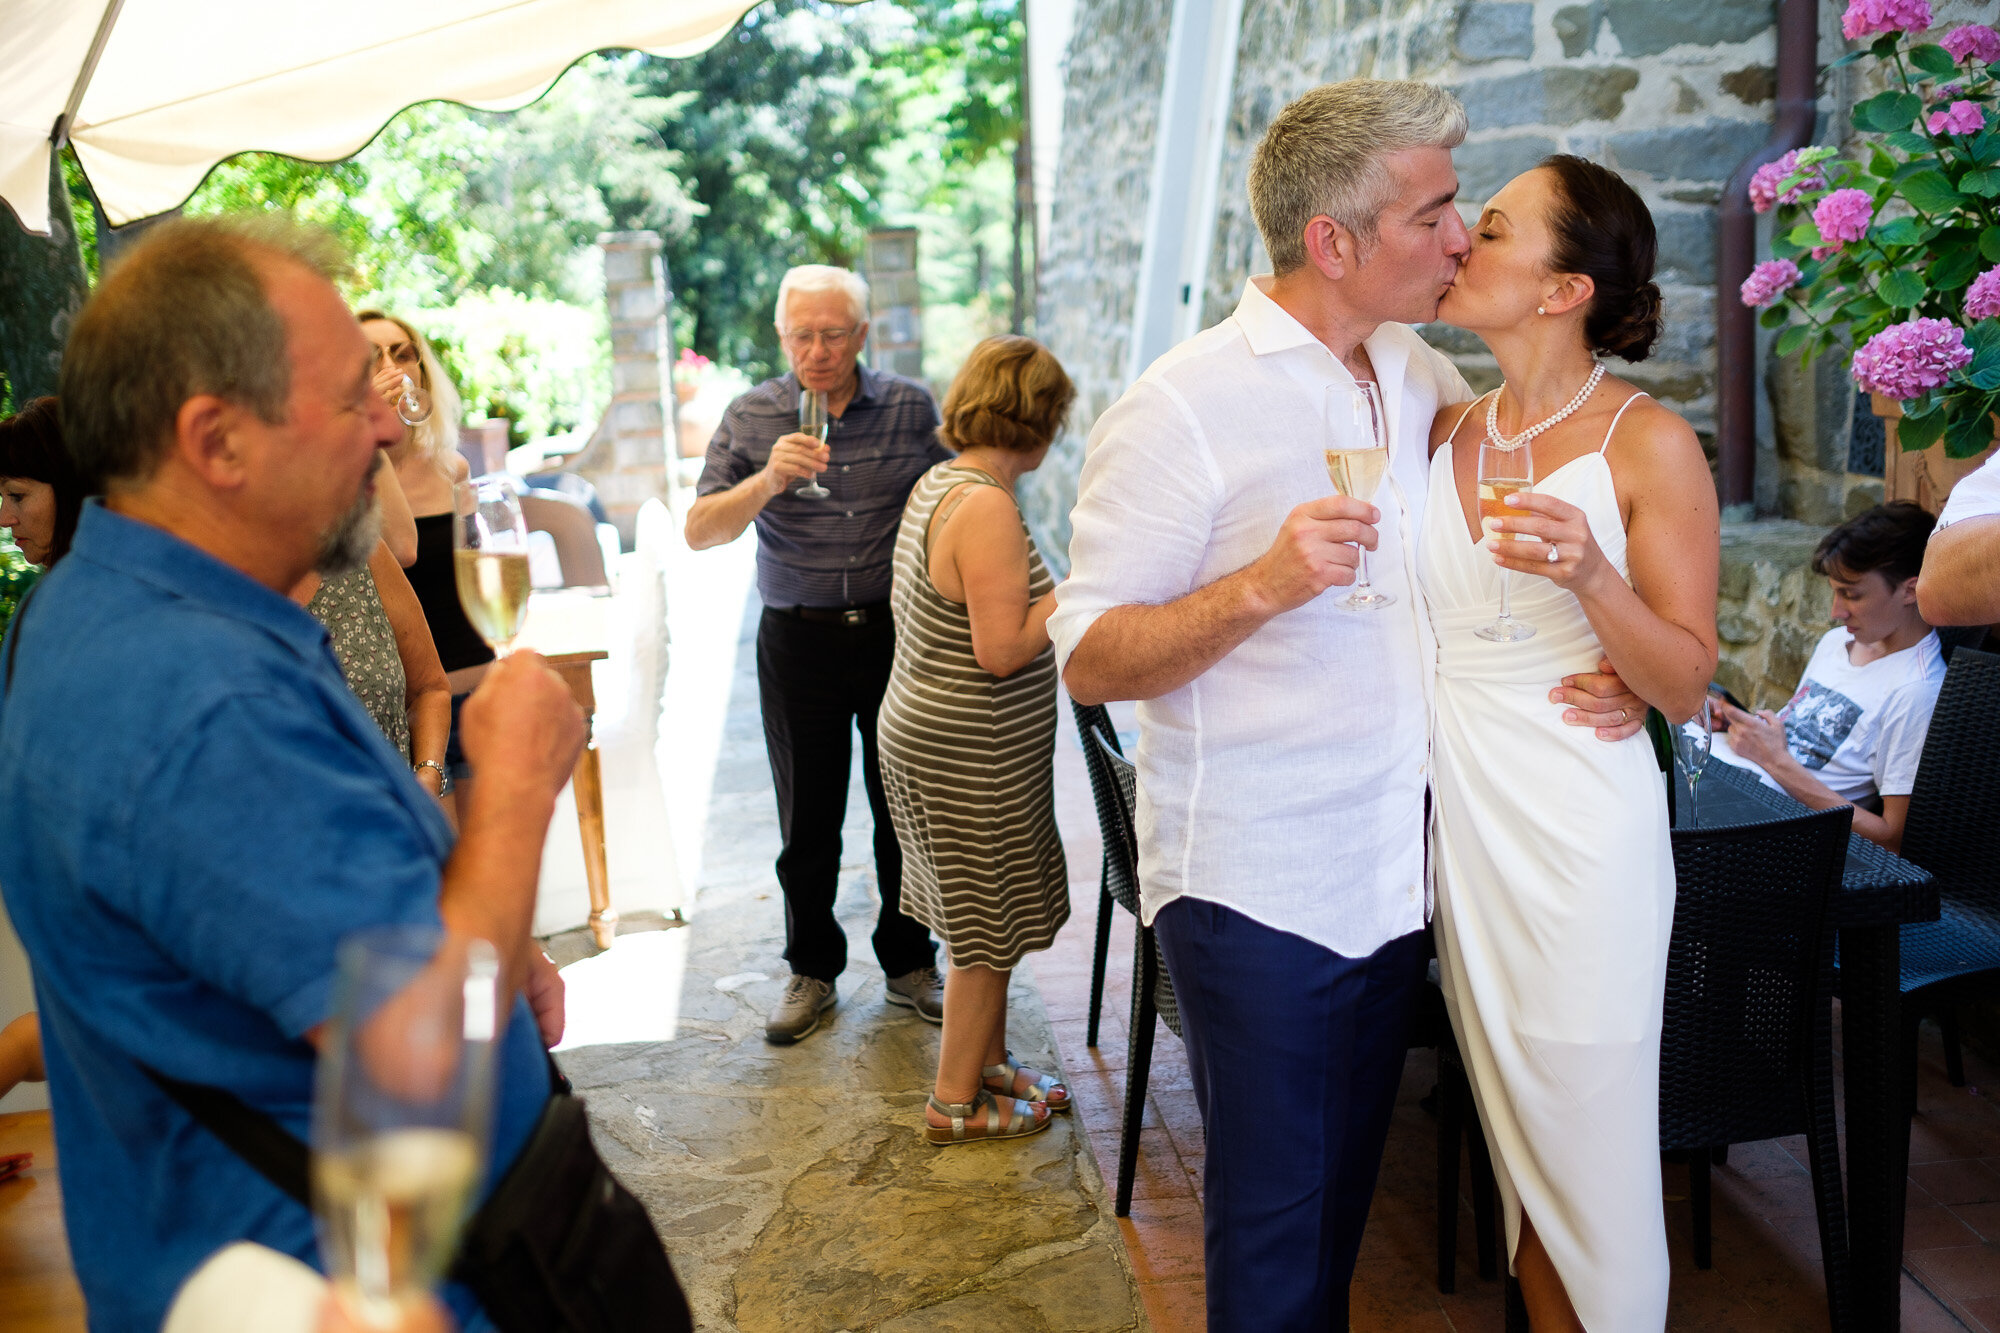  Elena and Steve kiss after their champagne toast at the villa La Sorgente di Francesca during their Tuscany destination wedding by wedding photographer Scott Williams (www.scottwilliamsphotographer.com) 